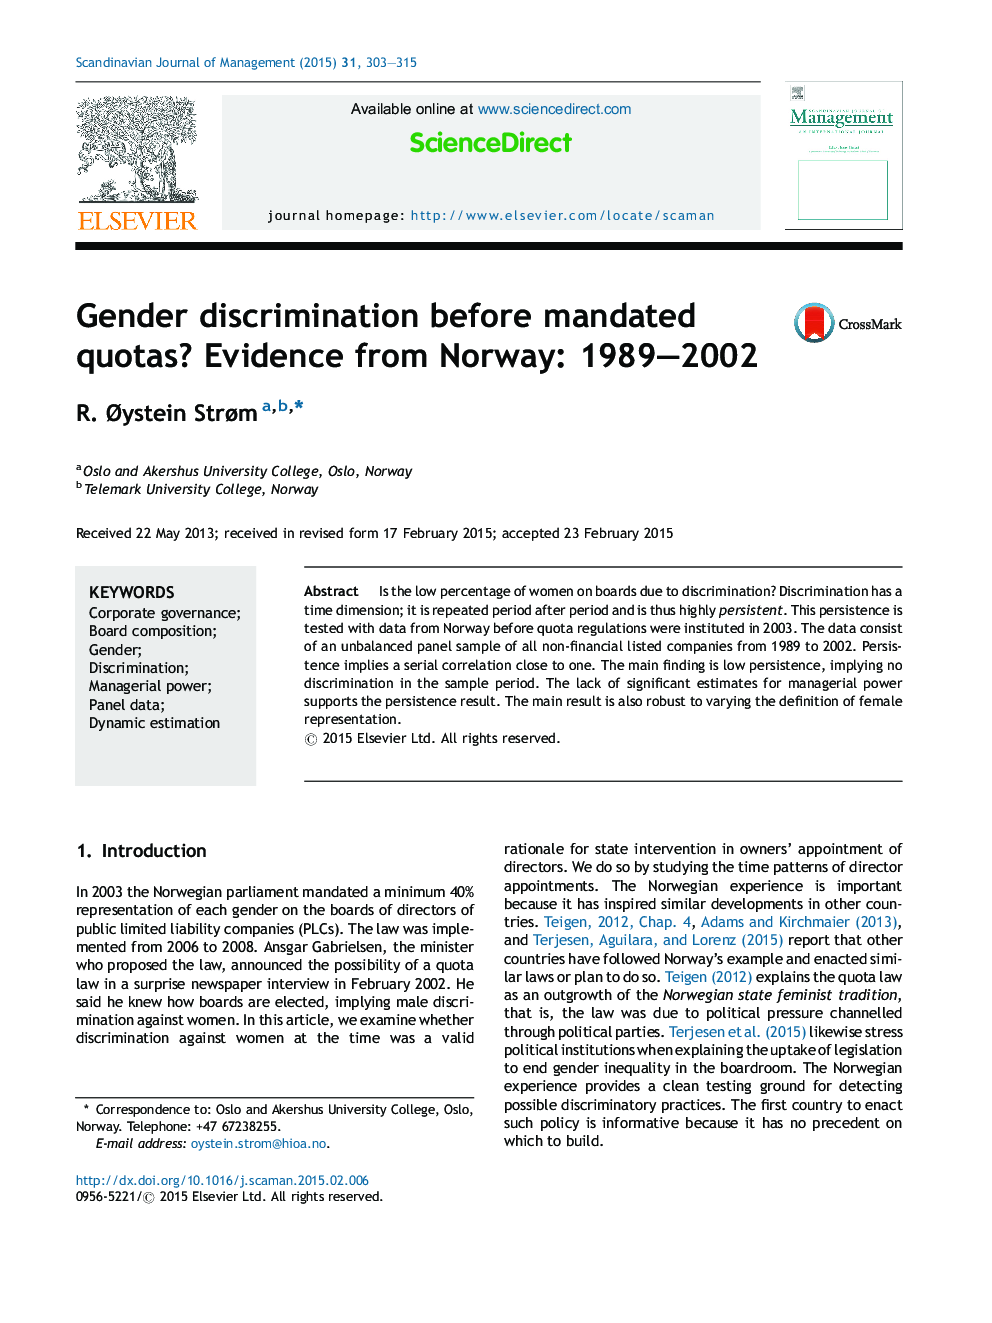 Gender discrimination before mandated quotas? Evidence from Norway: 1989–2002